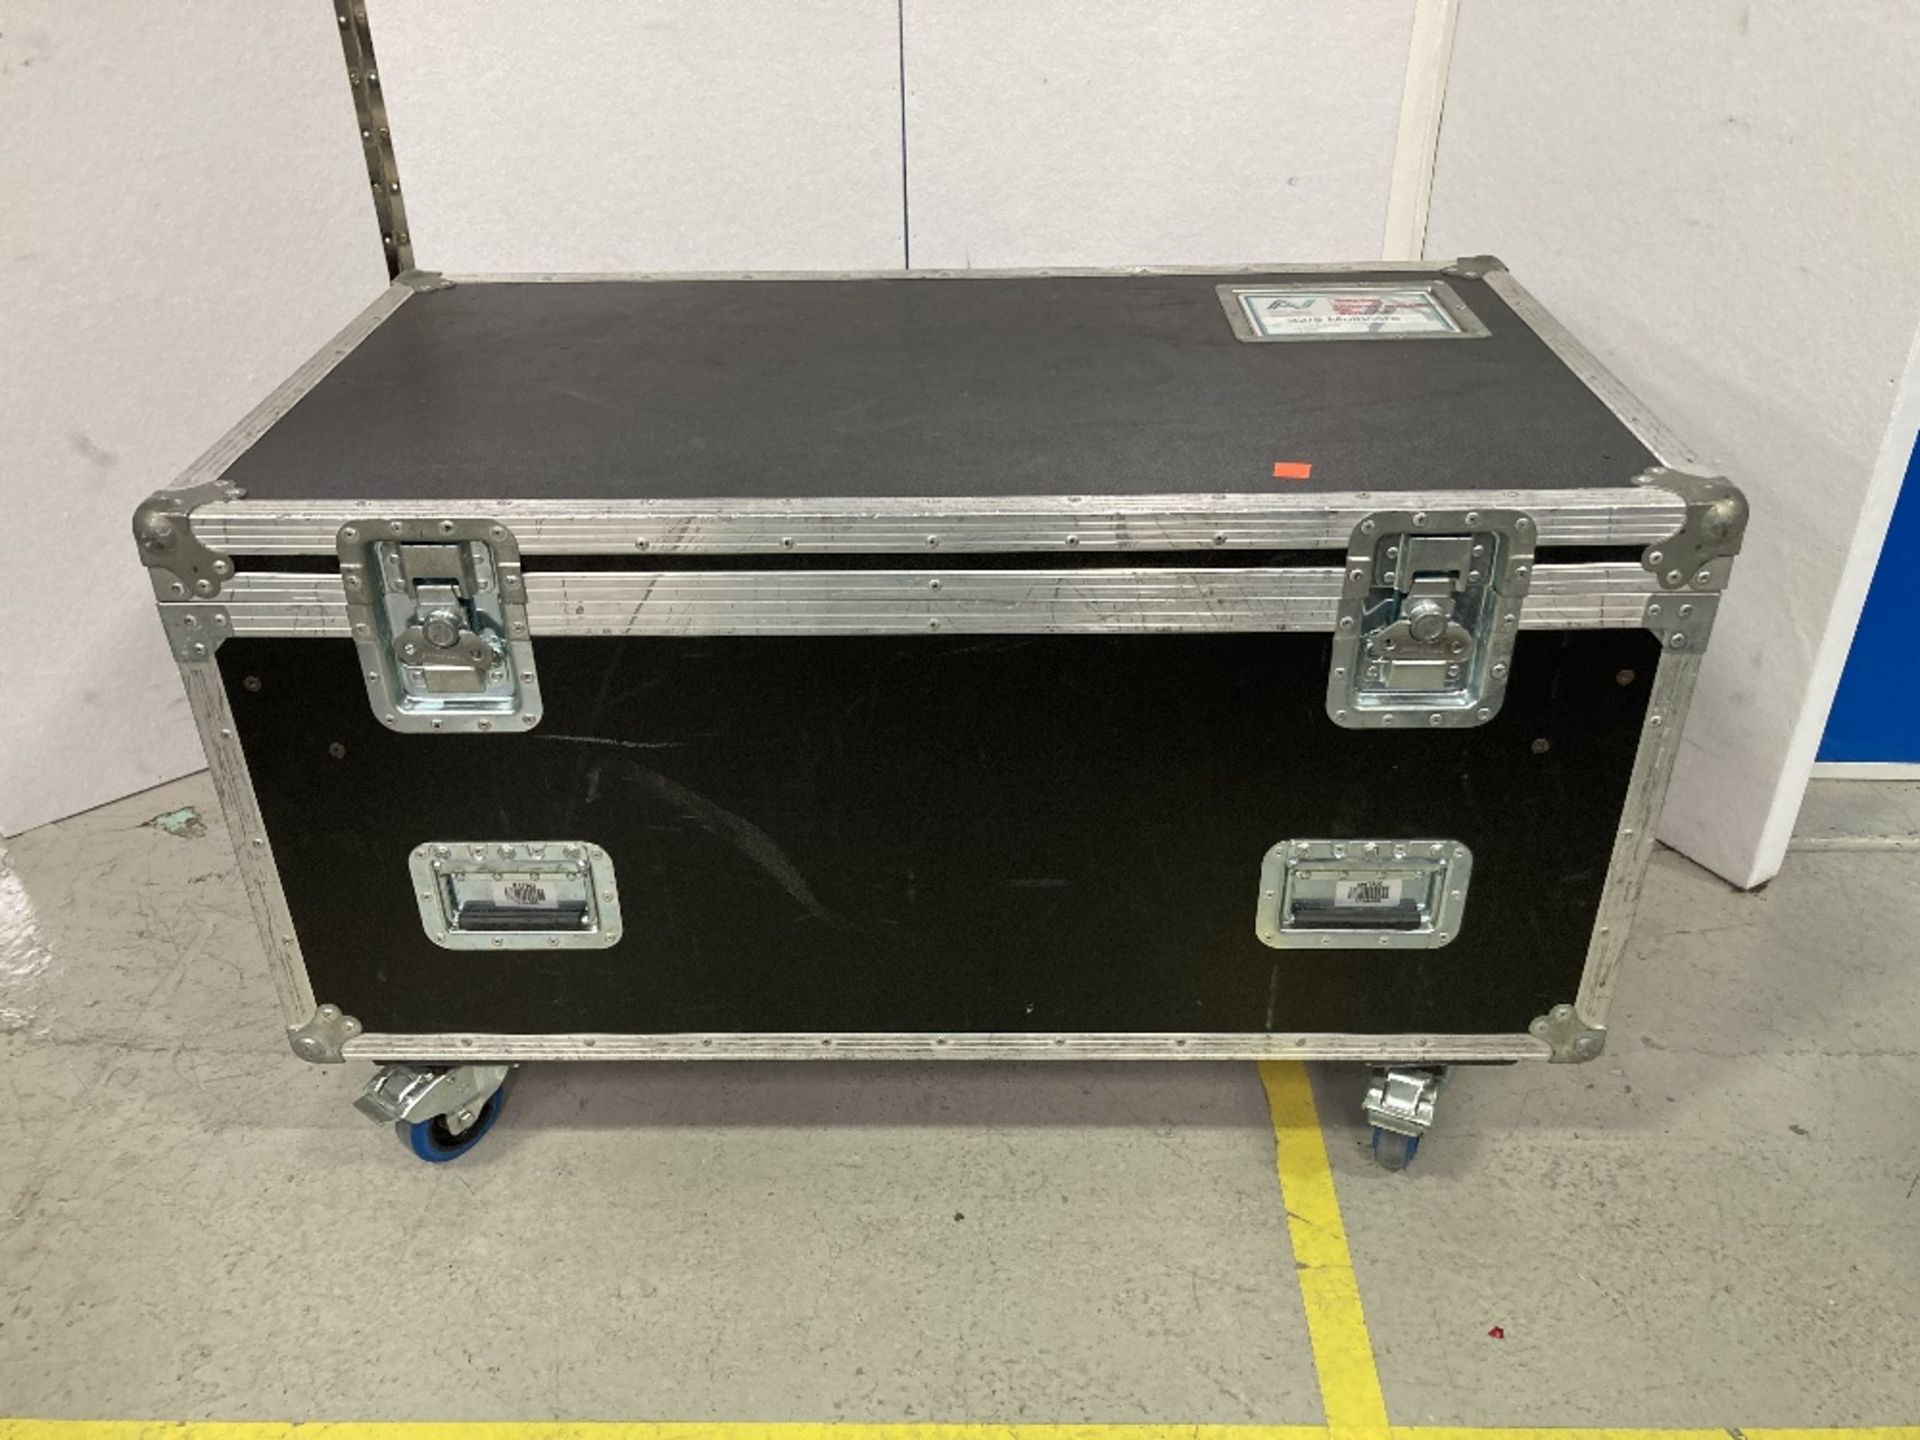 32/8 Multicore Cable, Stagebox, Tail & Heavy Duty Mobile Flight Case - Image 6 of 6